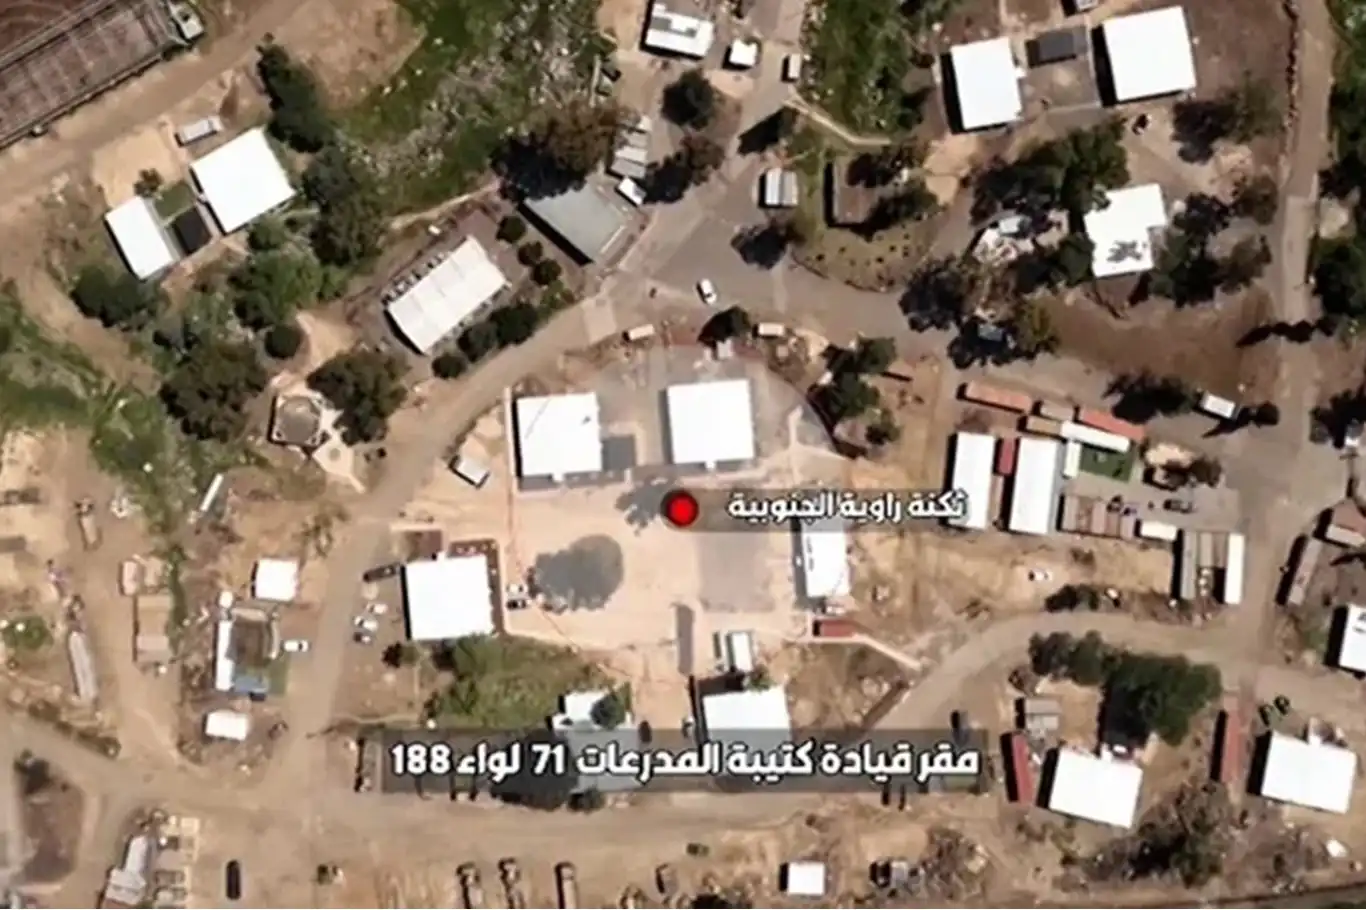 Hezbollah releases second episode of Hudhud spy video series